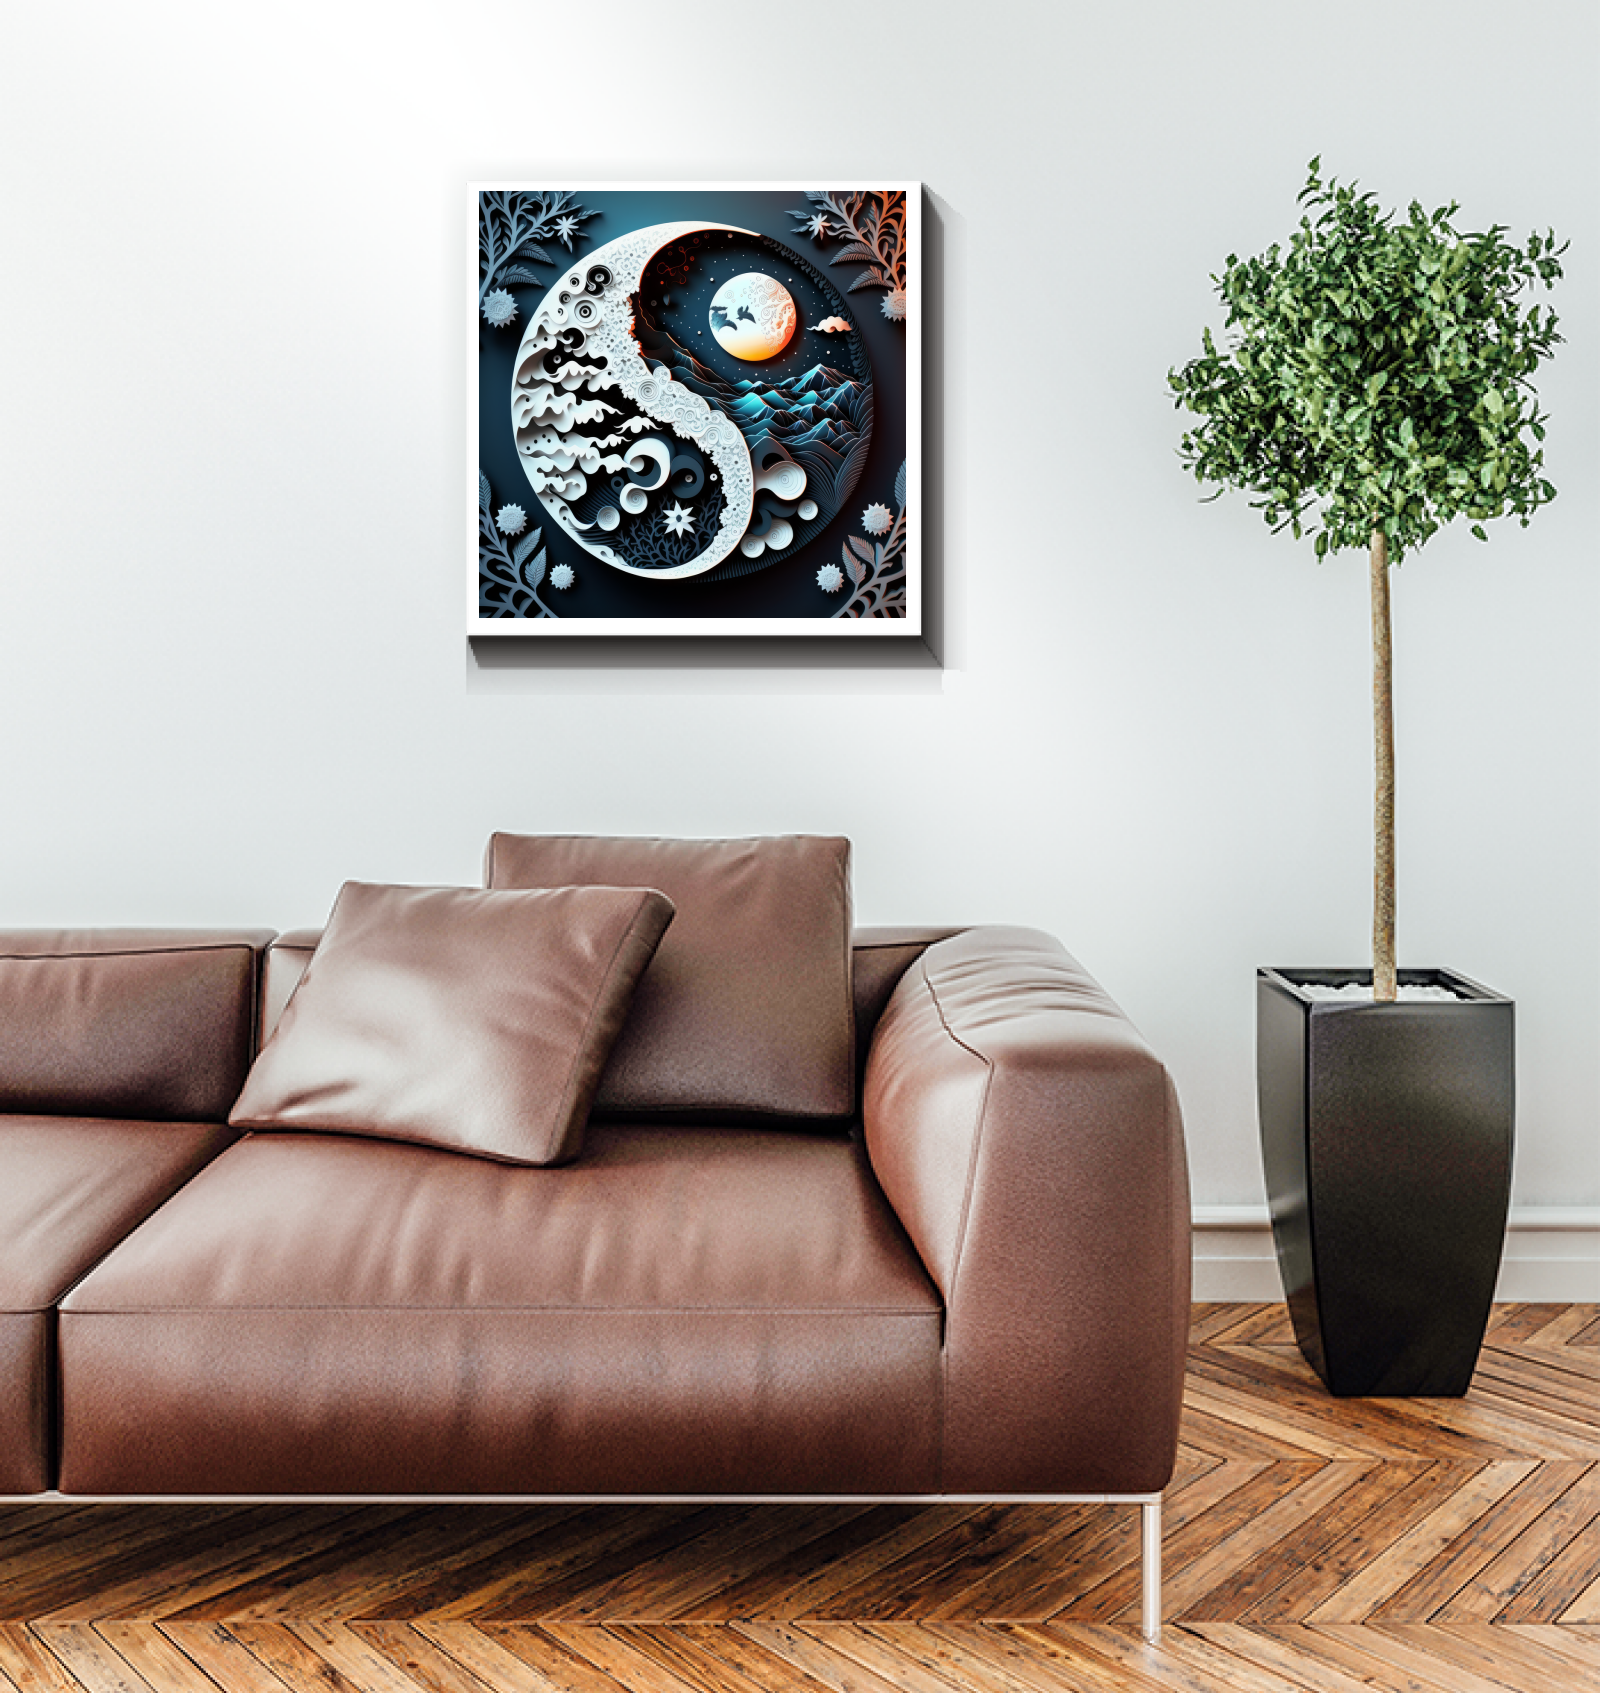 Artistic depiction of Earth and Sky in a wrapped canvas.